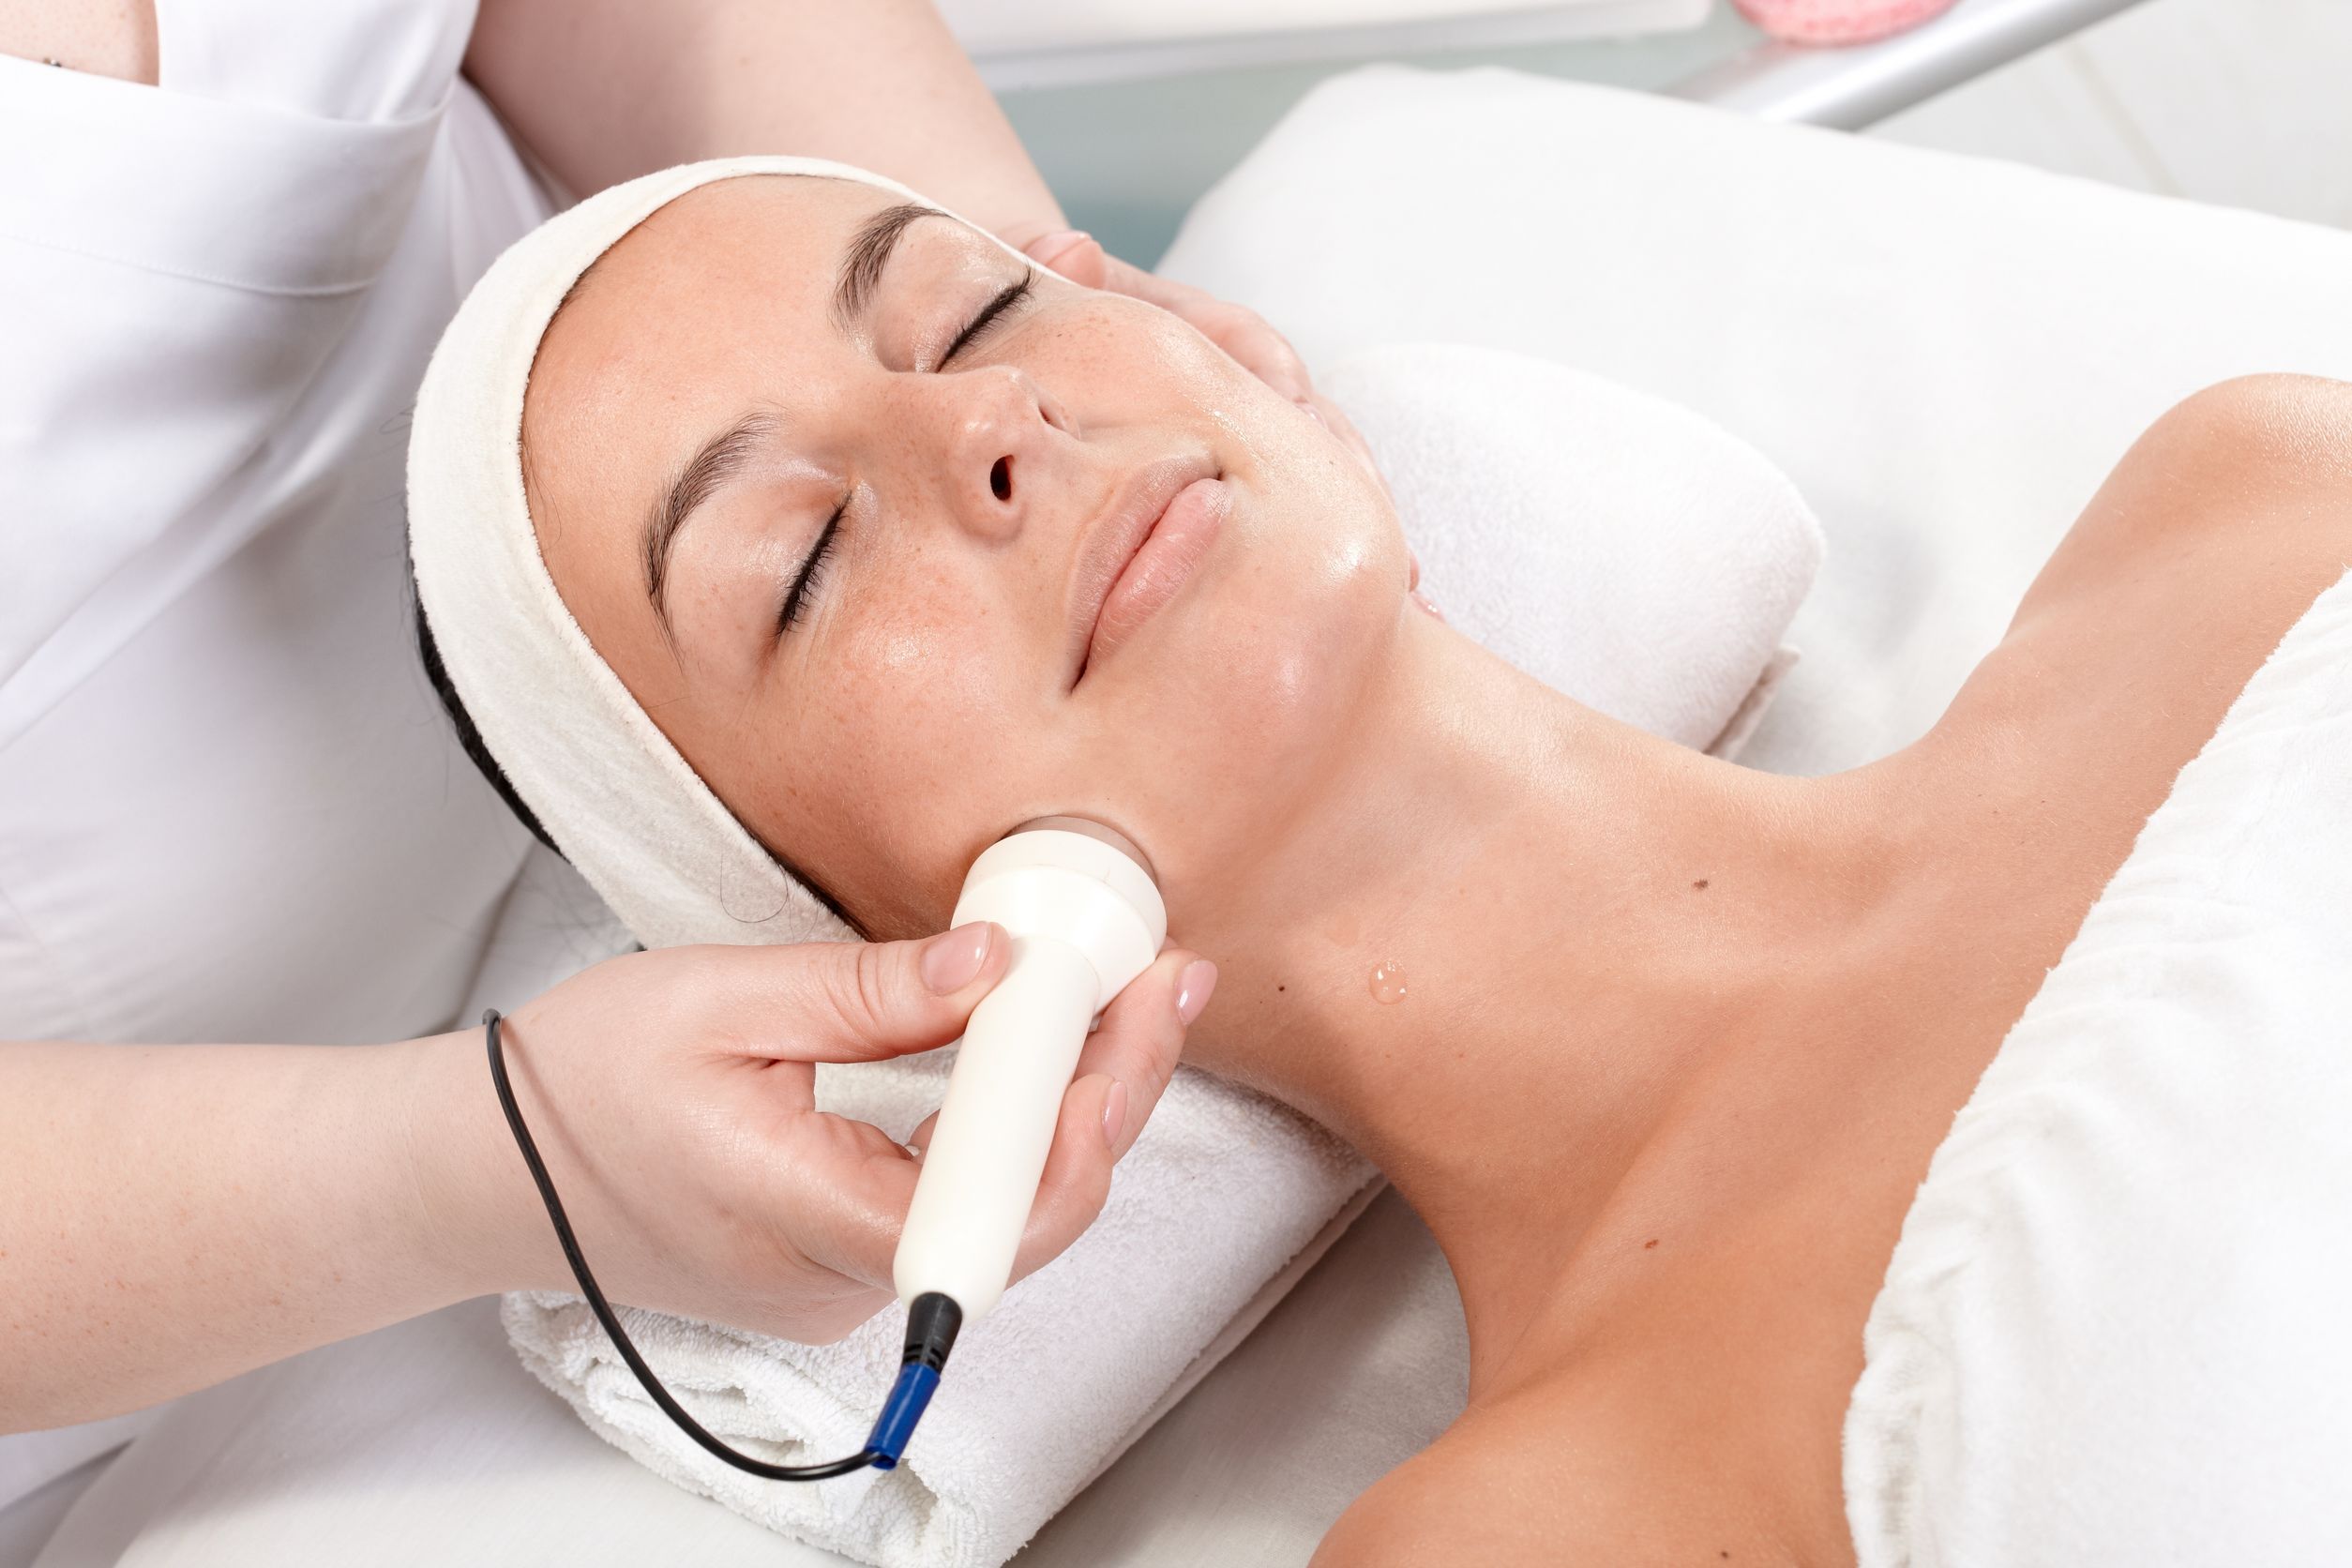 Spas provide the Best Laser Hair Removal Services in Overland Park with Experienced Techs.